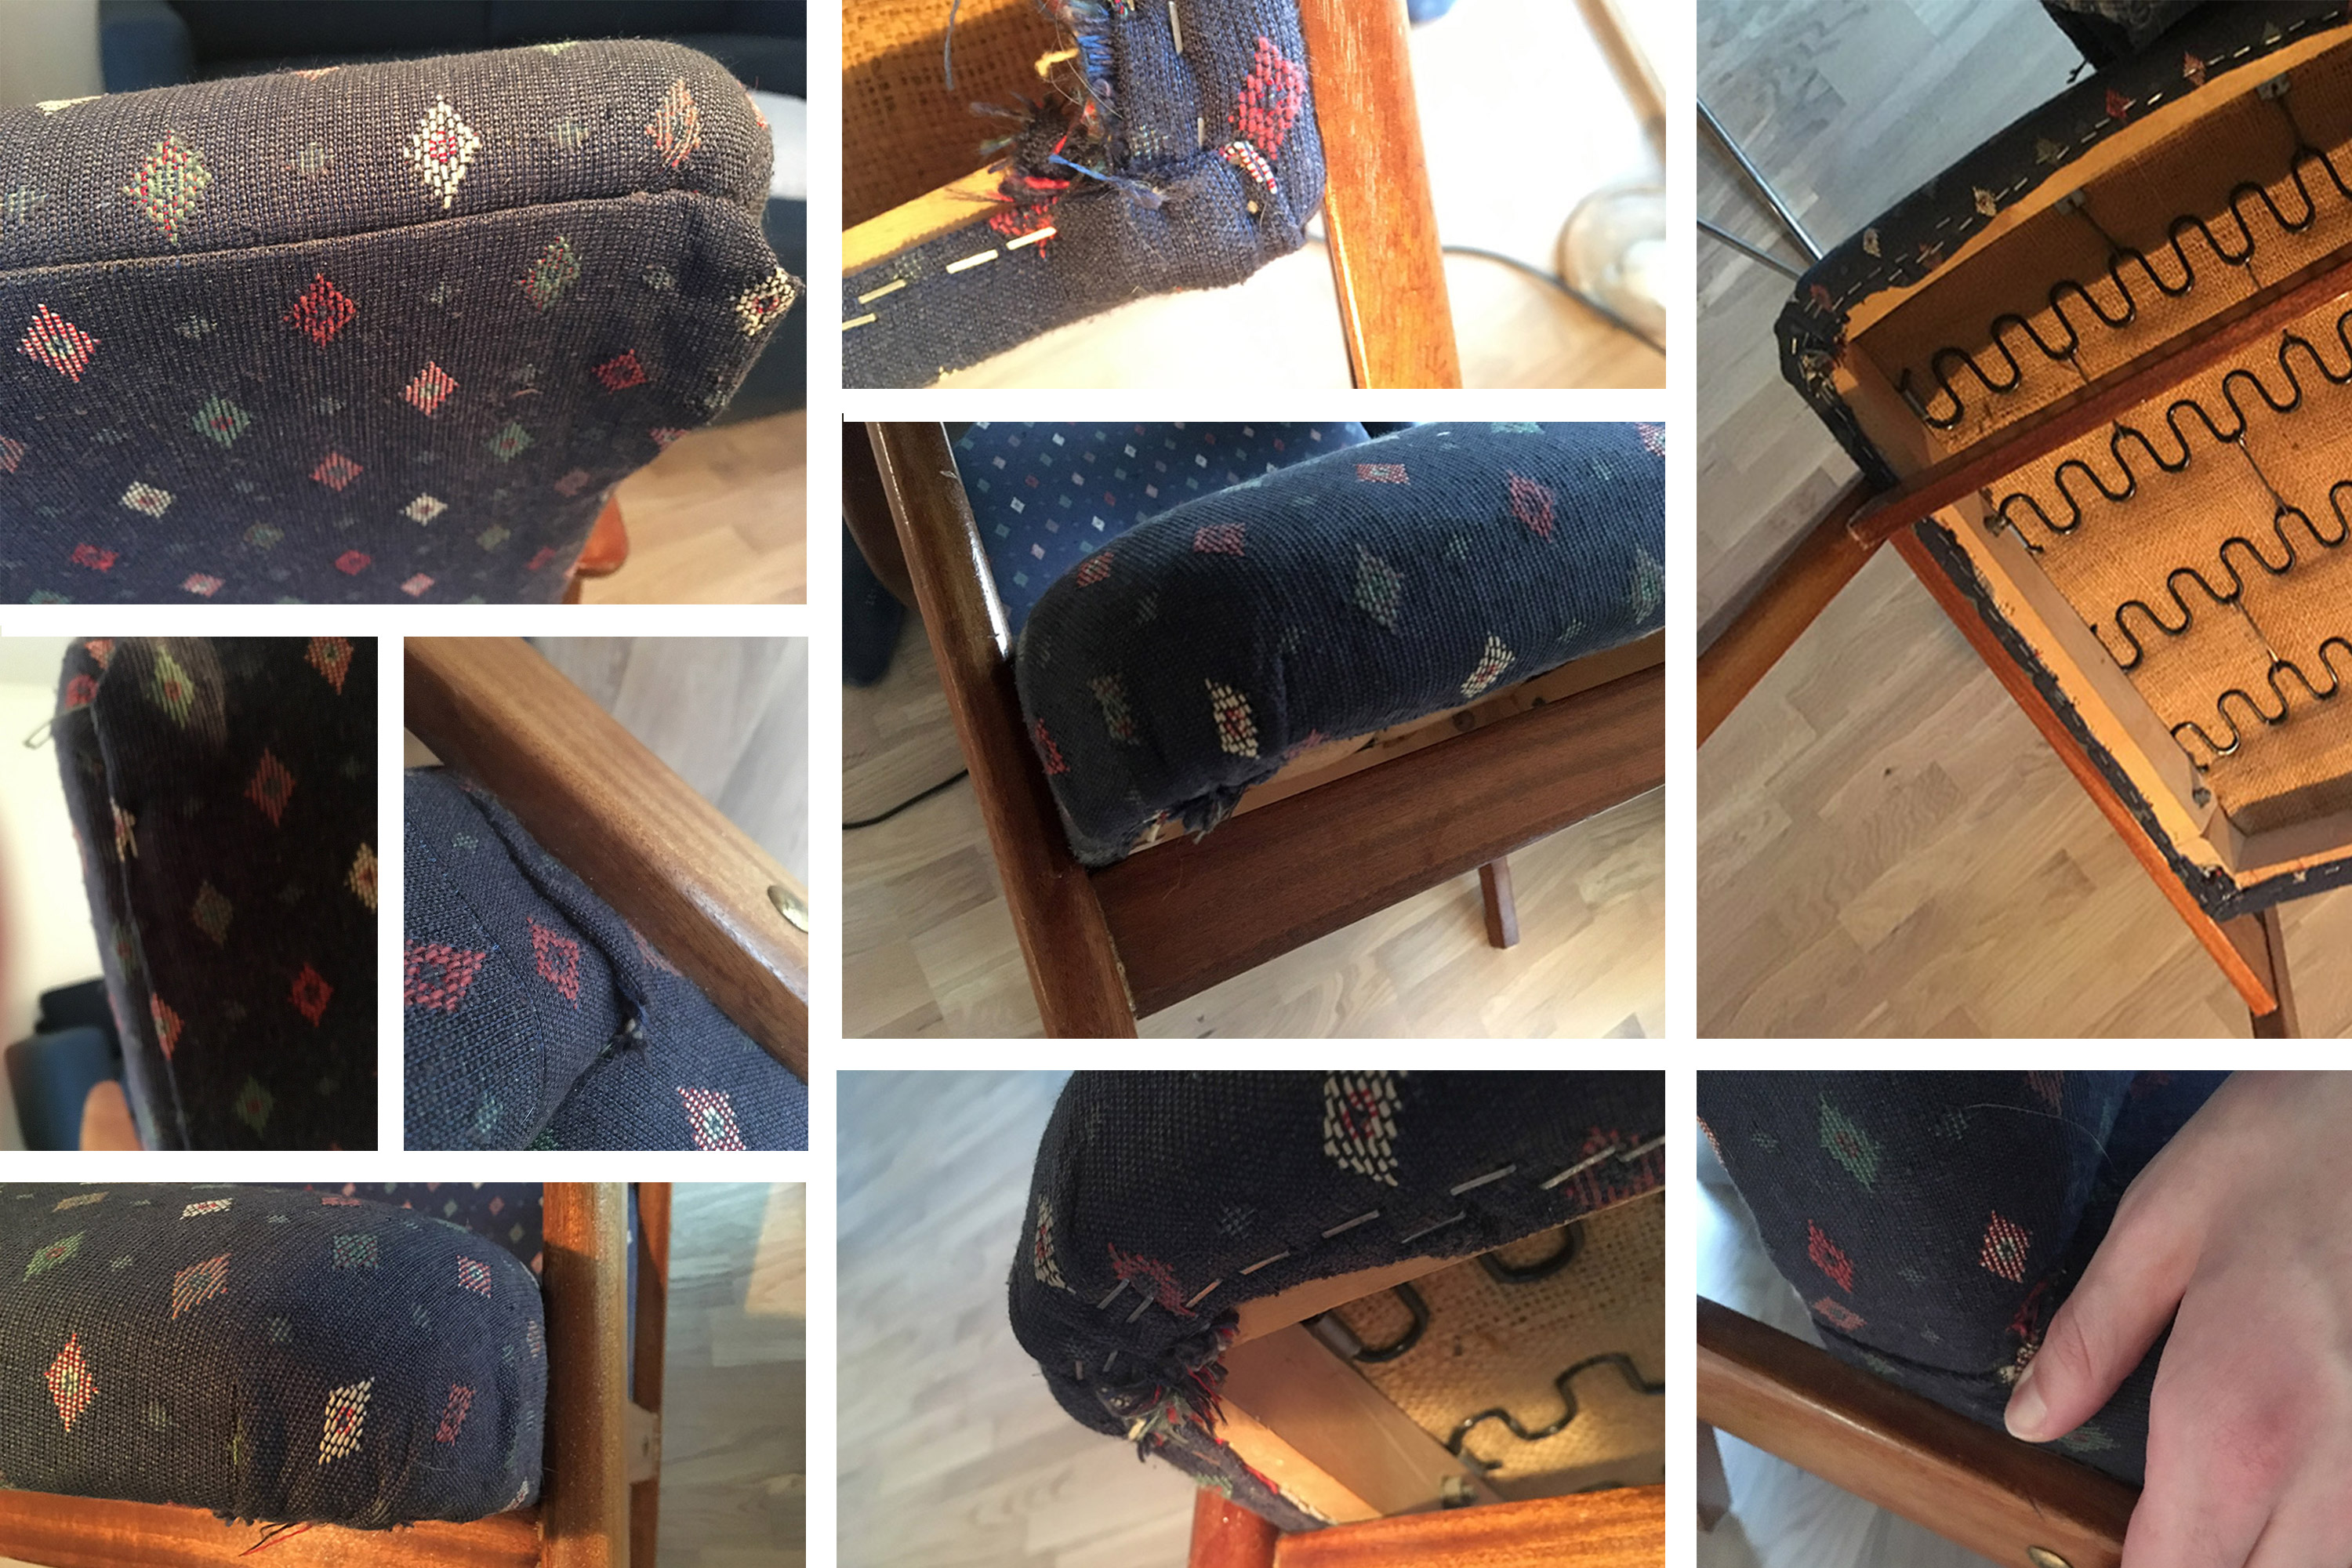 Photos taken to document upholstery work